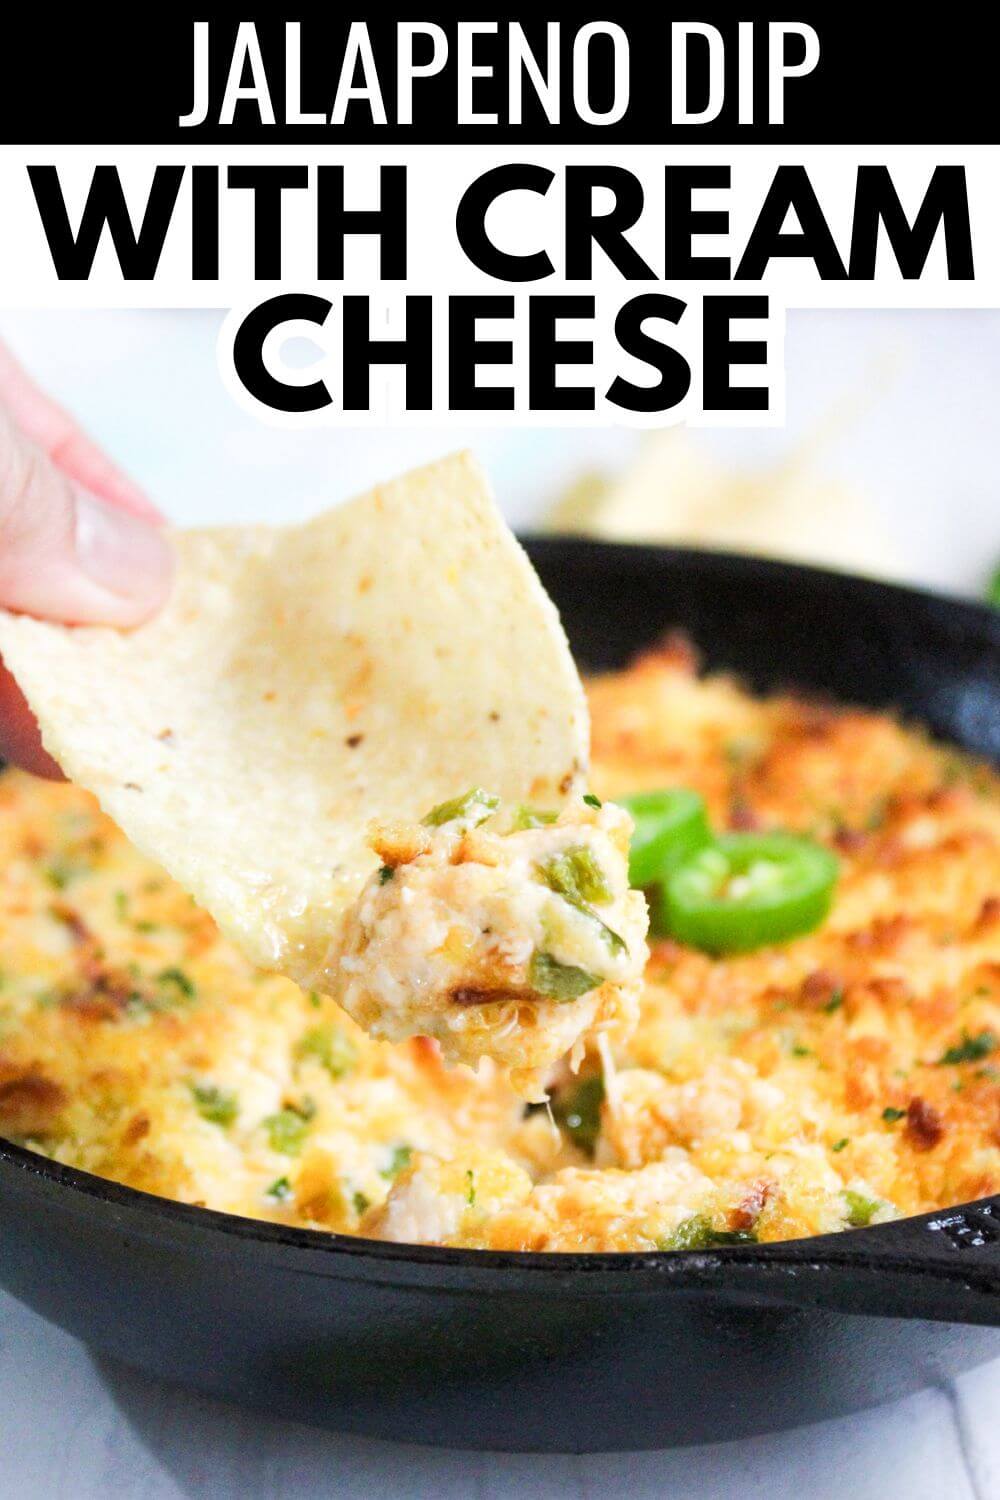 Jalapeno dip with cream cheese.